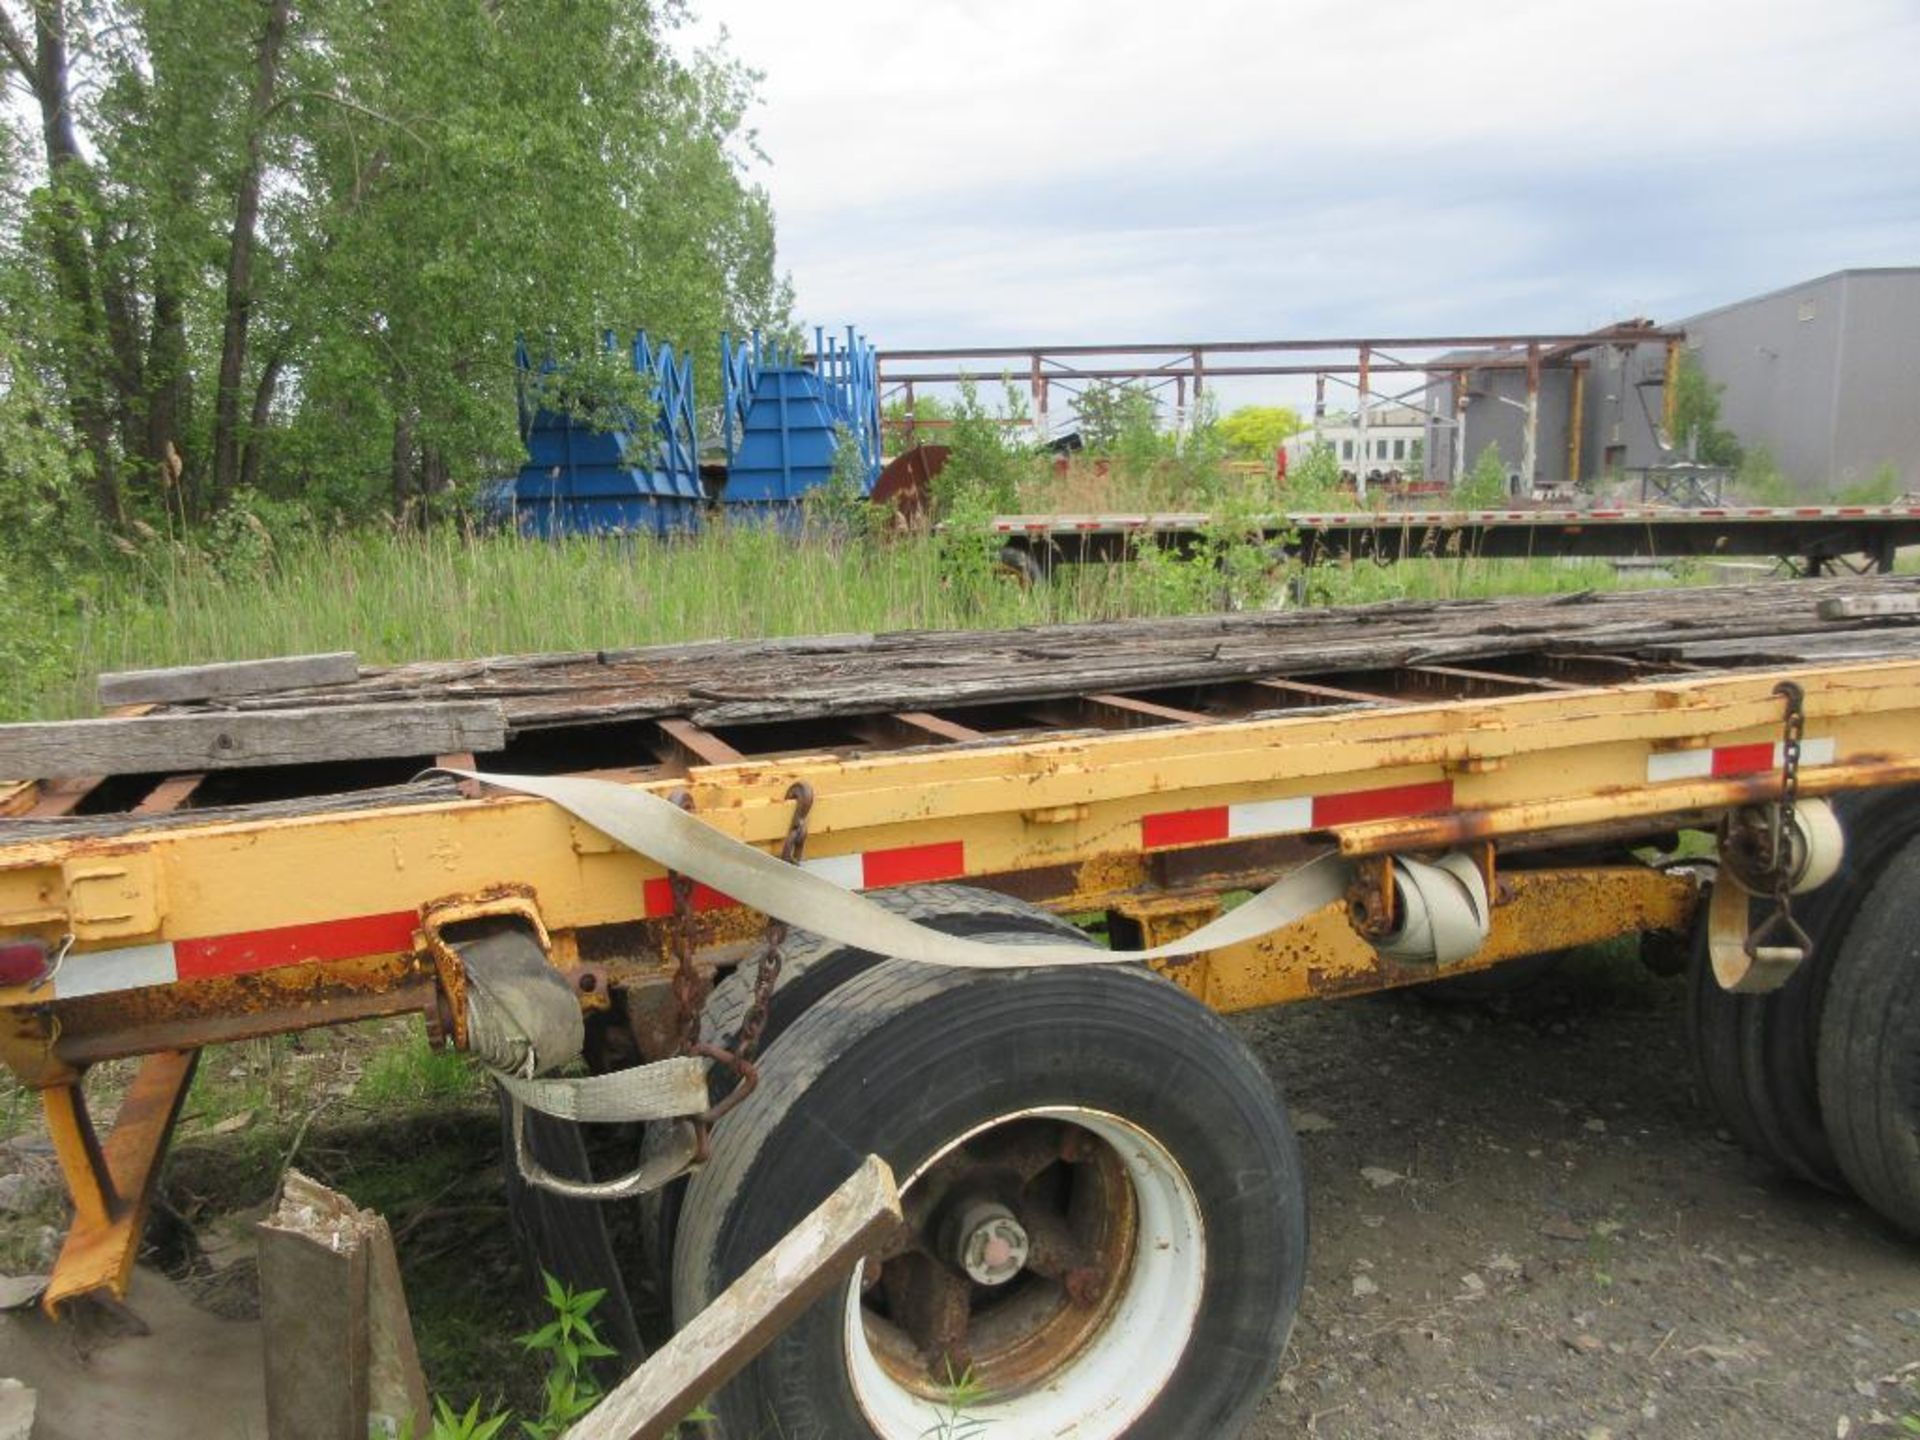 1967 CANCAR, 44' TRAILER, VIN 671026 (NORTH WEST YARD) *AUCTIONEER'S NOTE: YARD TRAILER, NO OWNERSHI - Image 9 of 10